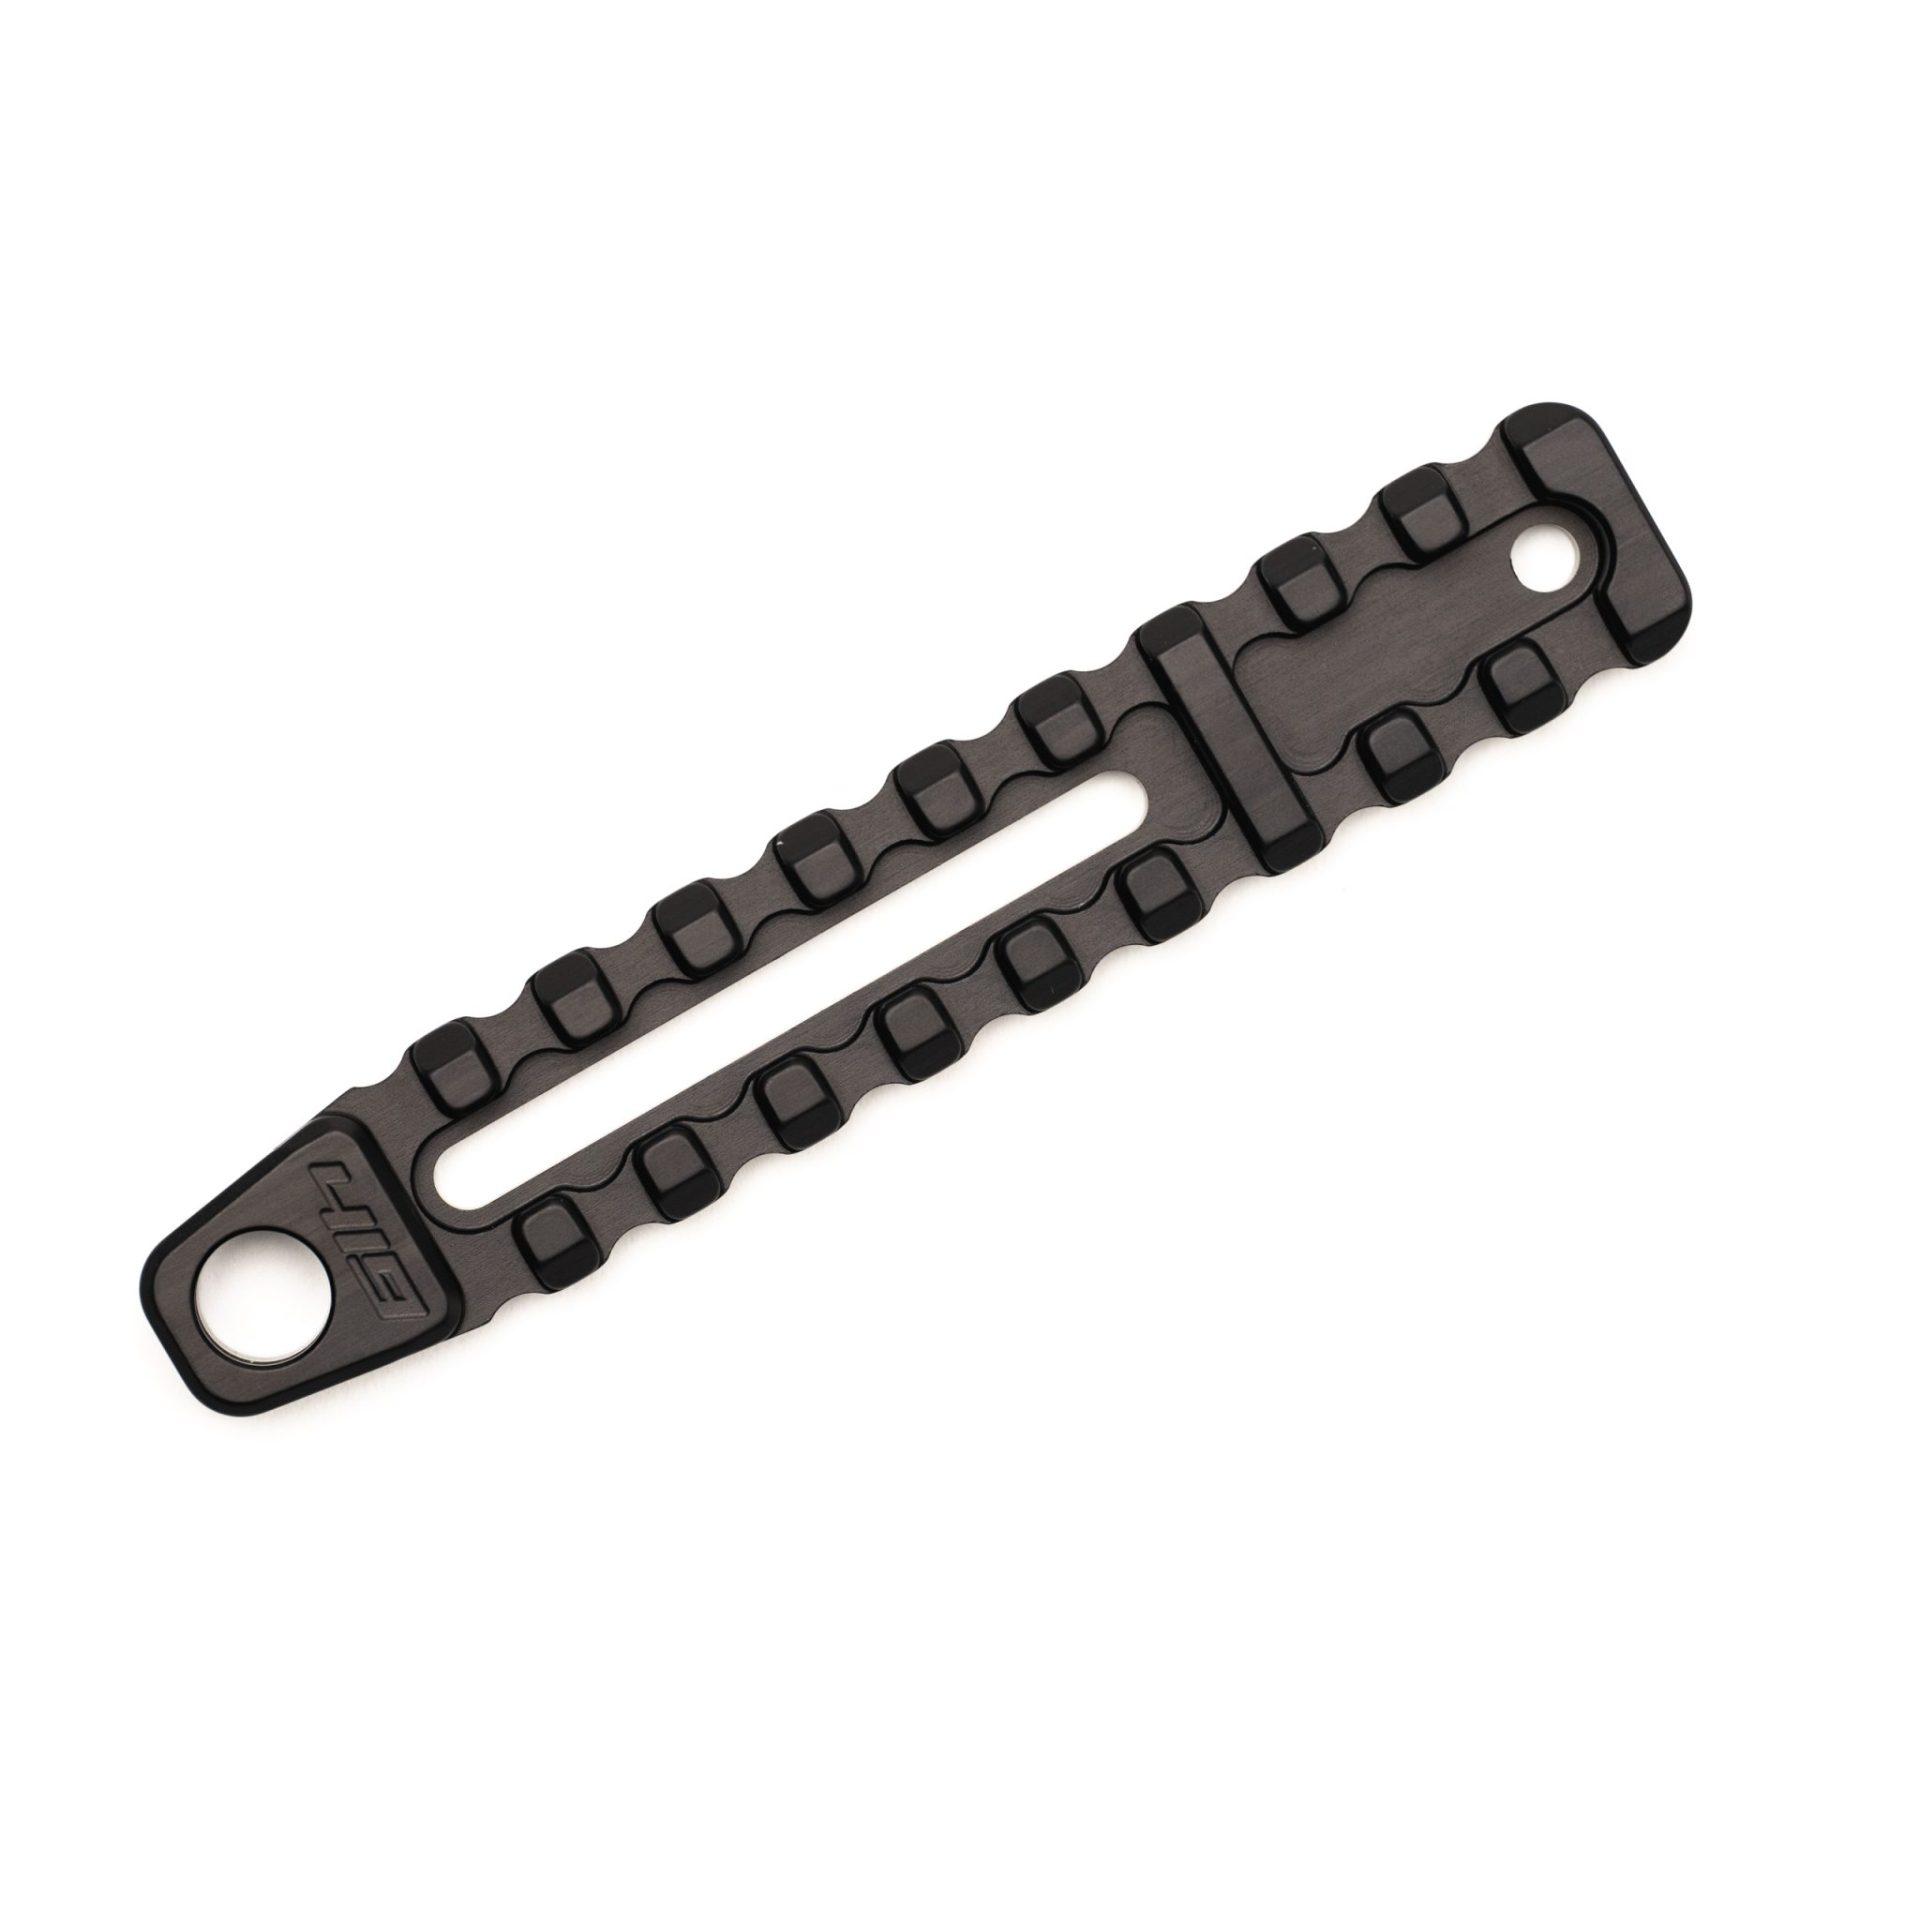 Area 419 Improved Bipod Rail 4.8 Long 10-Slot Snag-Free T-Nut Attachment